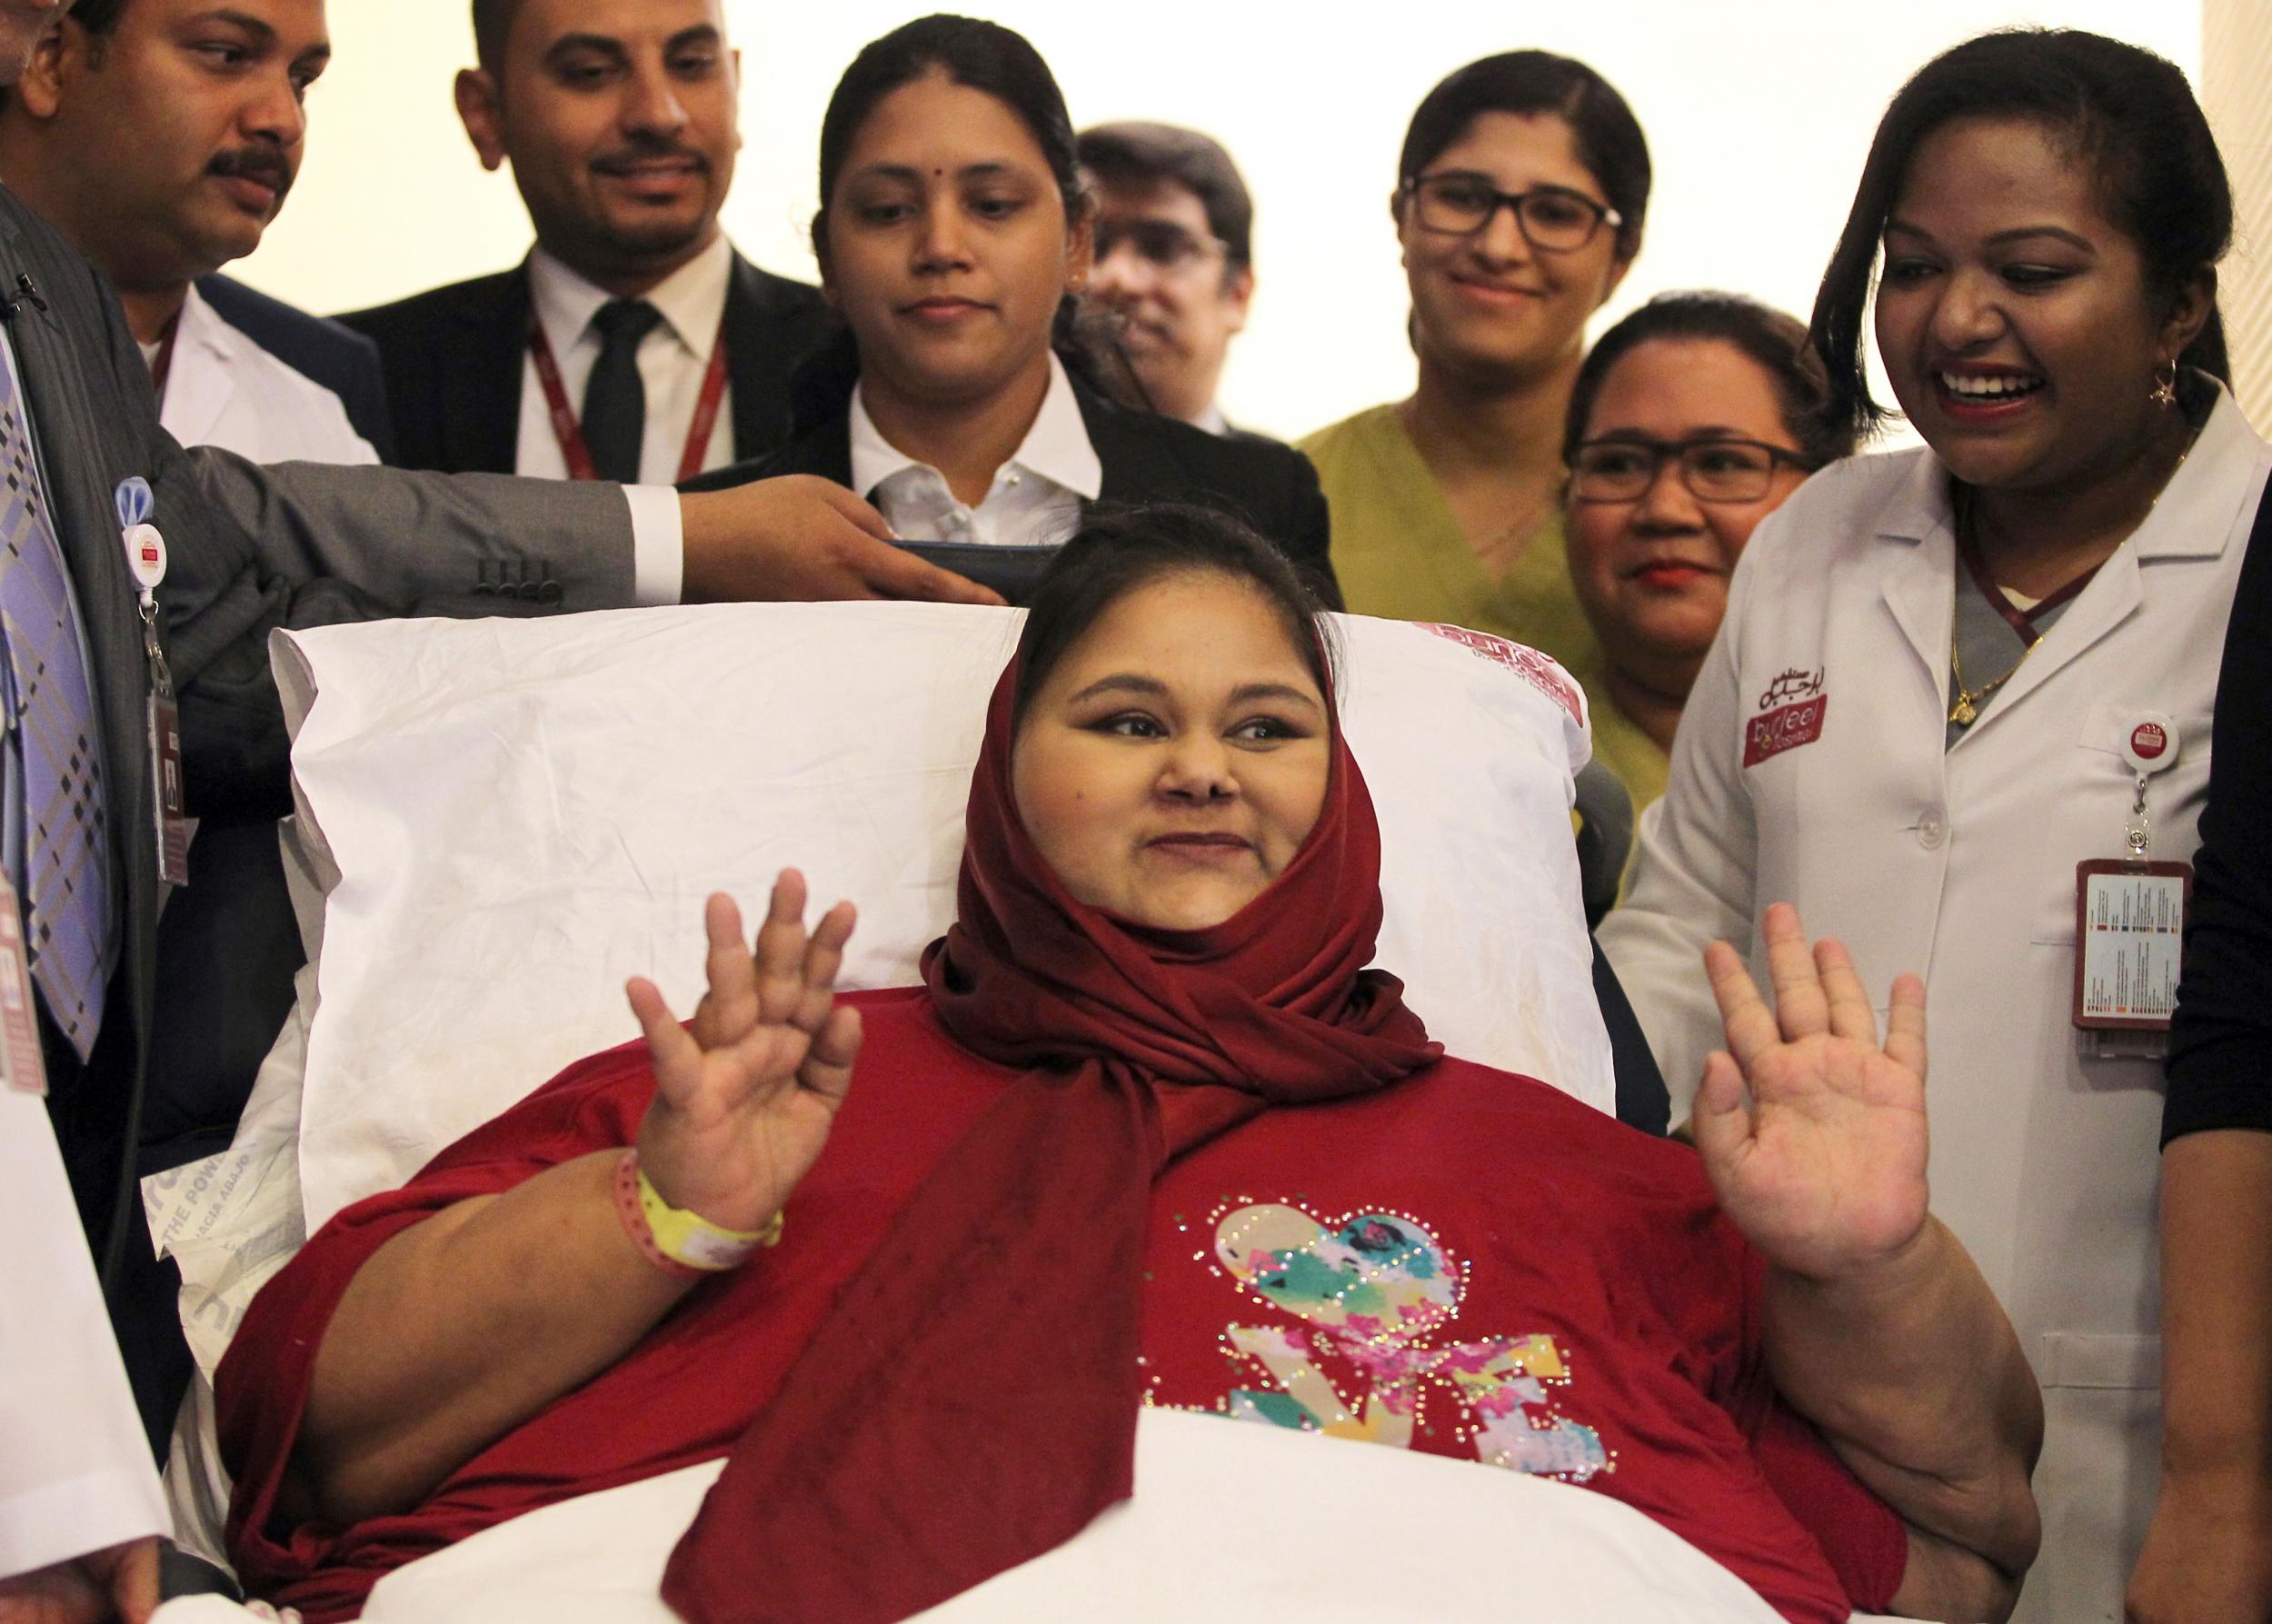 Eman Ahmed Abd El Aty waving during a press conference at the Burjeel Hospital in Abu Dhabi.